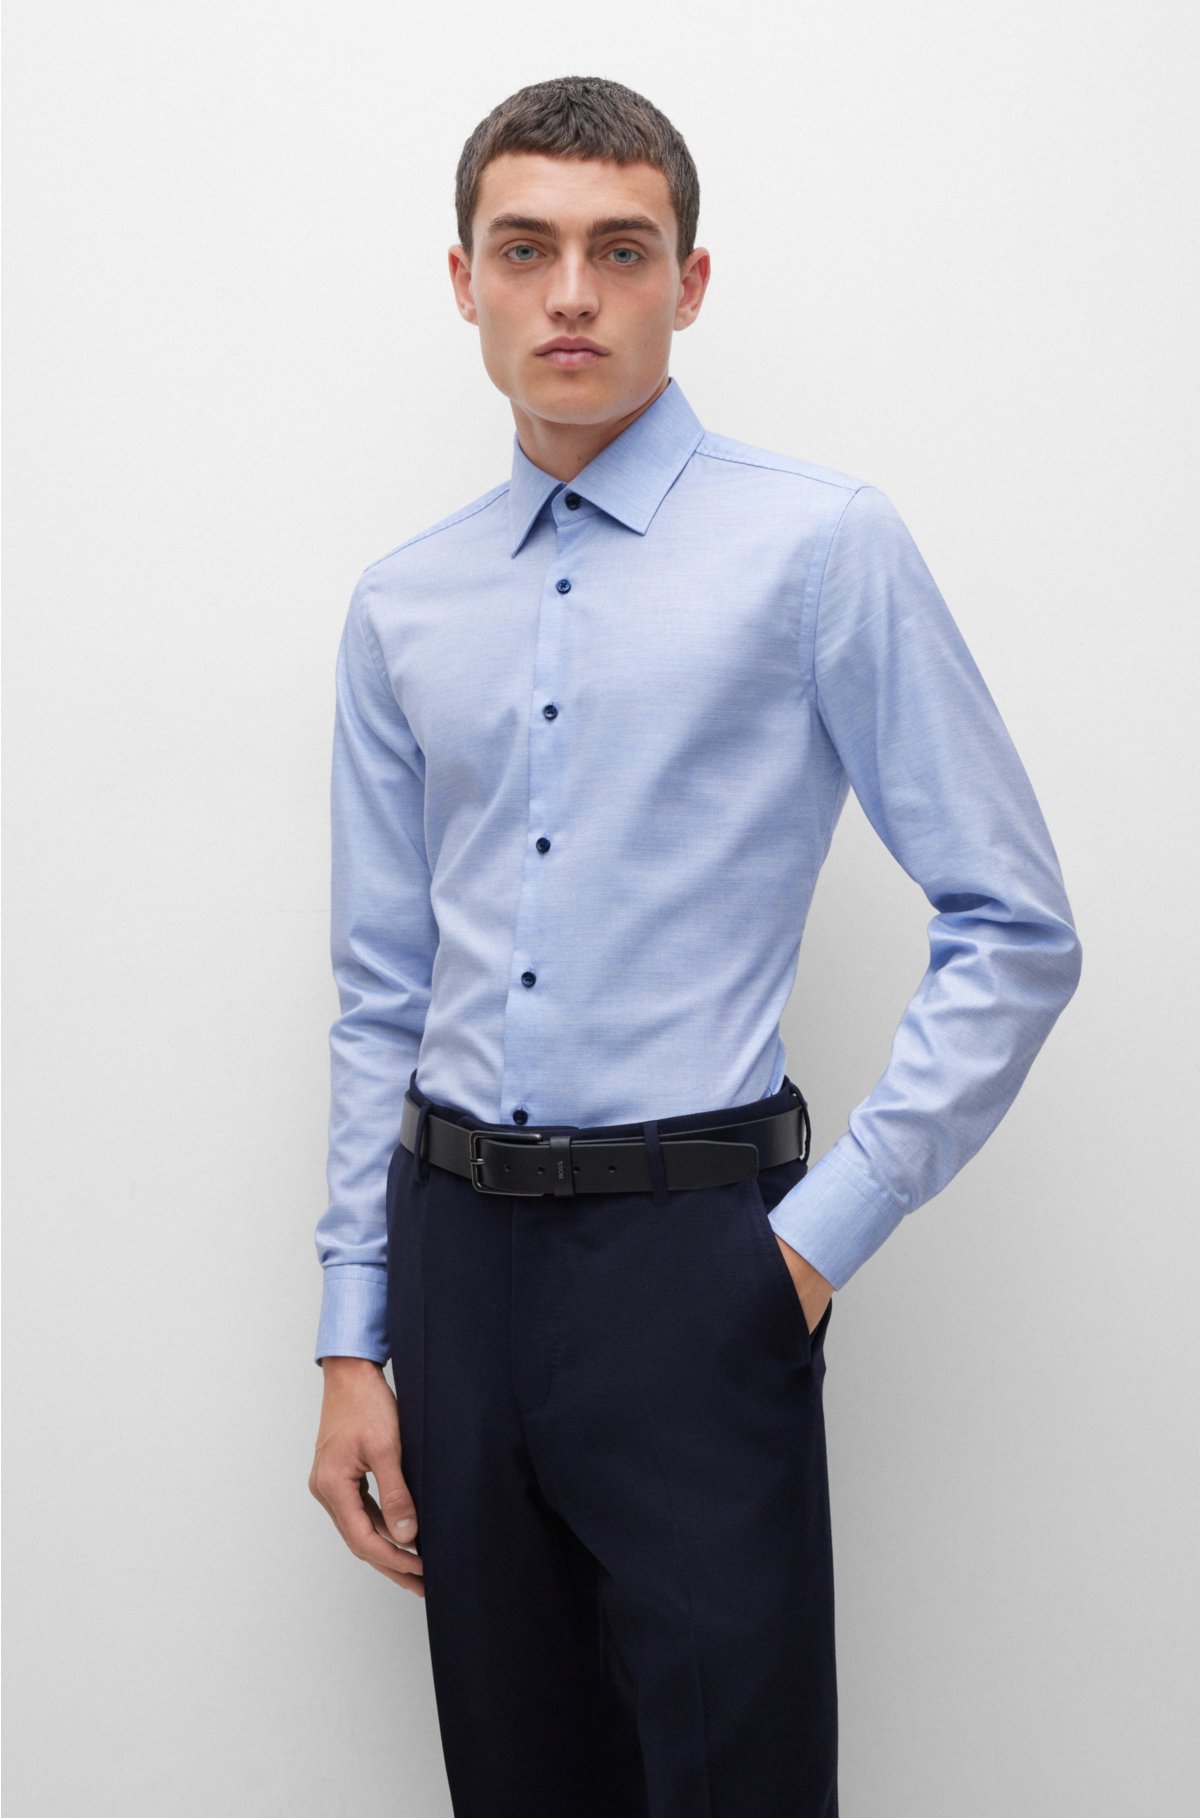 Men's Super Fitted Shirts, Formal Shirts